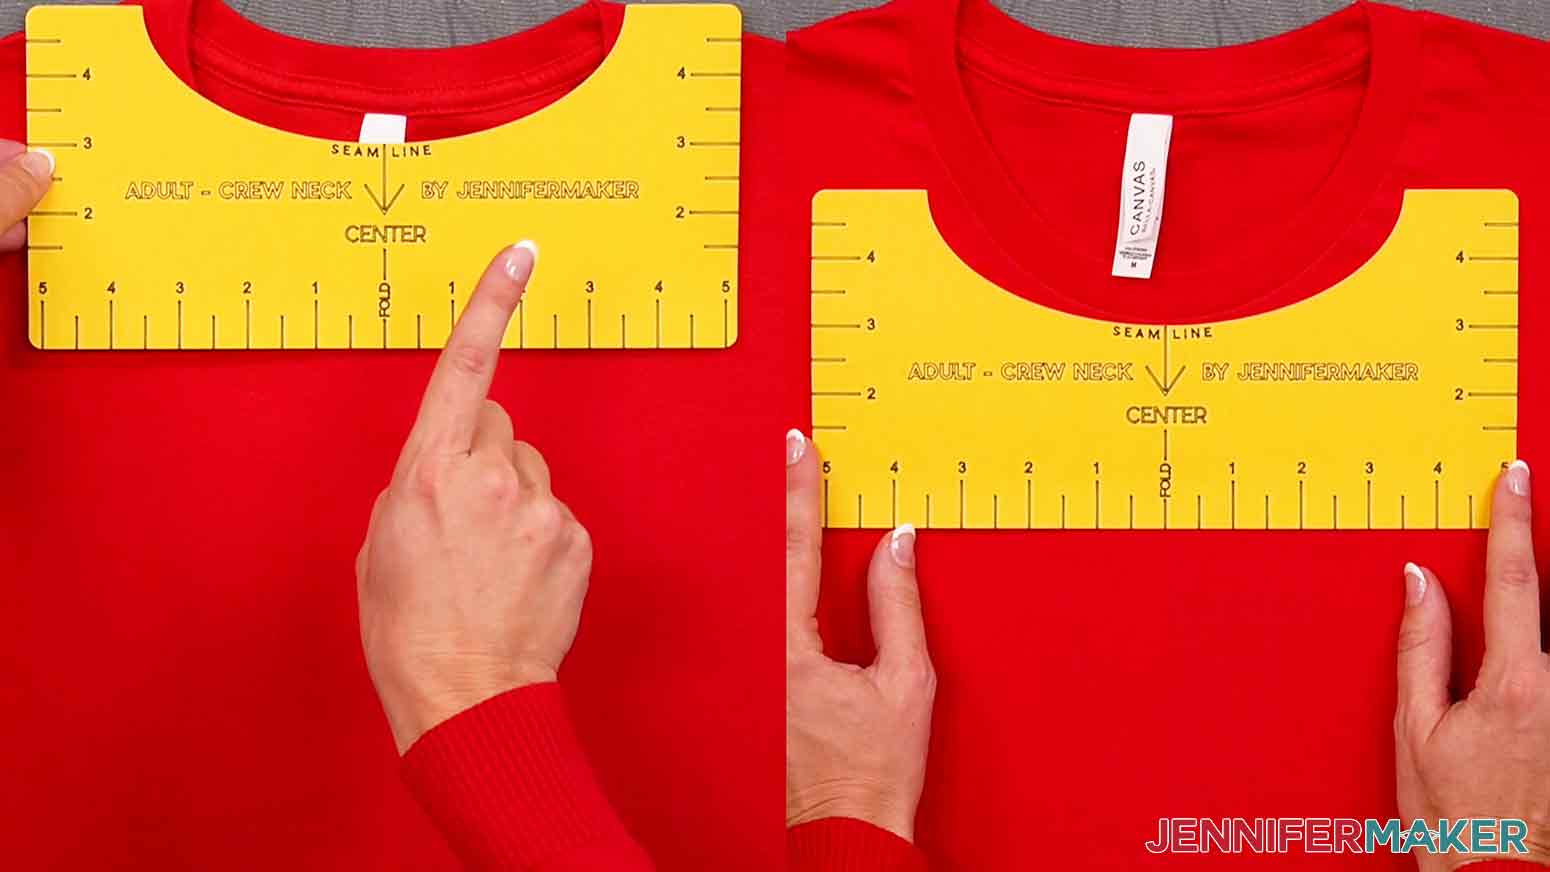 A side-by-side comparison of the T-Shirt Ruler’s proper neckline placement; the first image shows that the wrong placement is above the neckline, and the image on the right shows that the correct placement is just under the collar seam of the t-shirt.